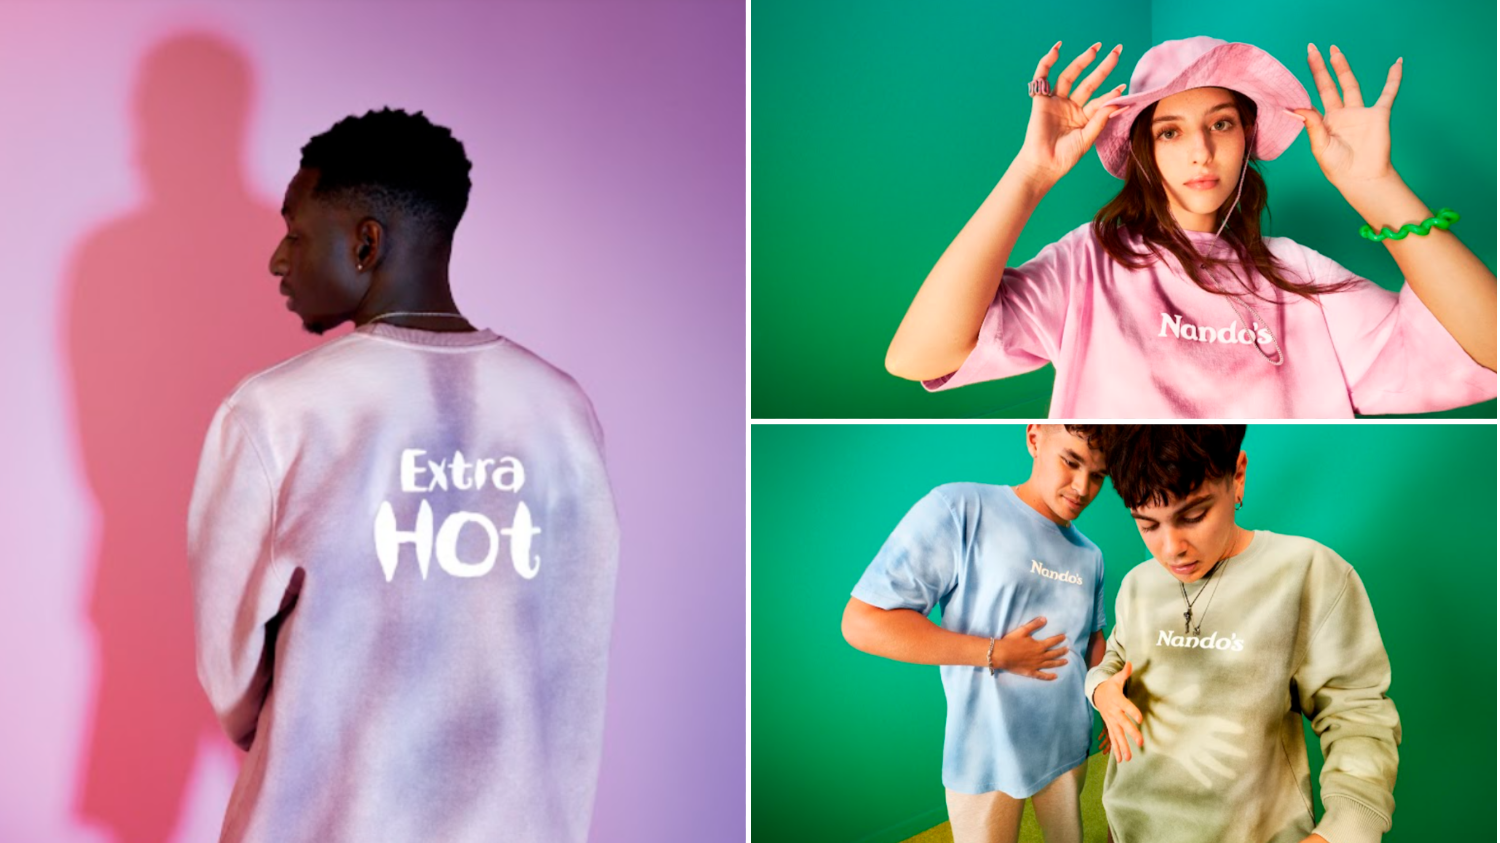 Nando’s announces a new clothing line based on heat levels – with lemon and herb tees and extra hot hats